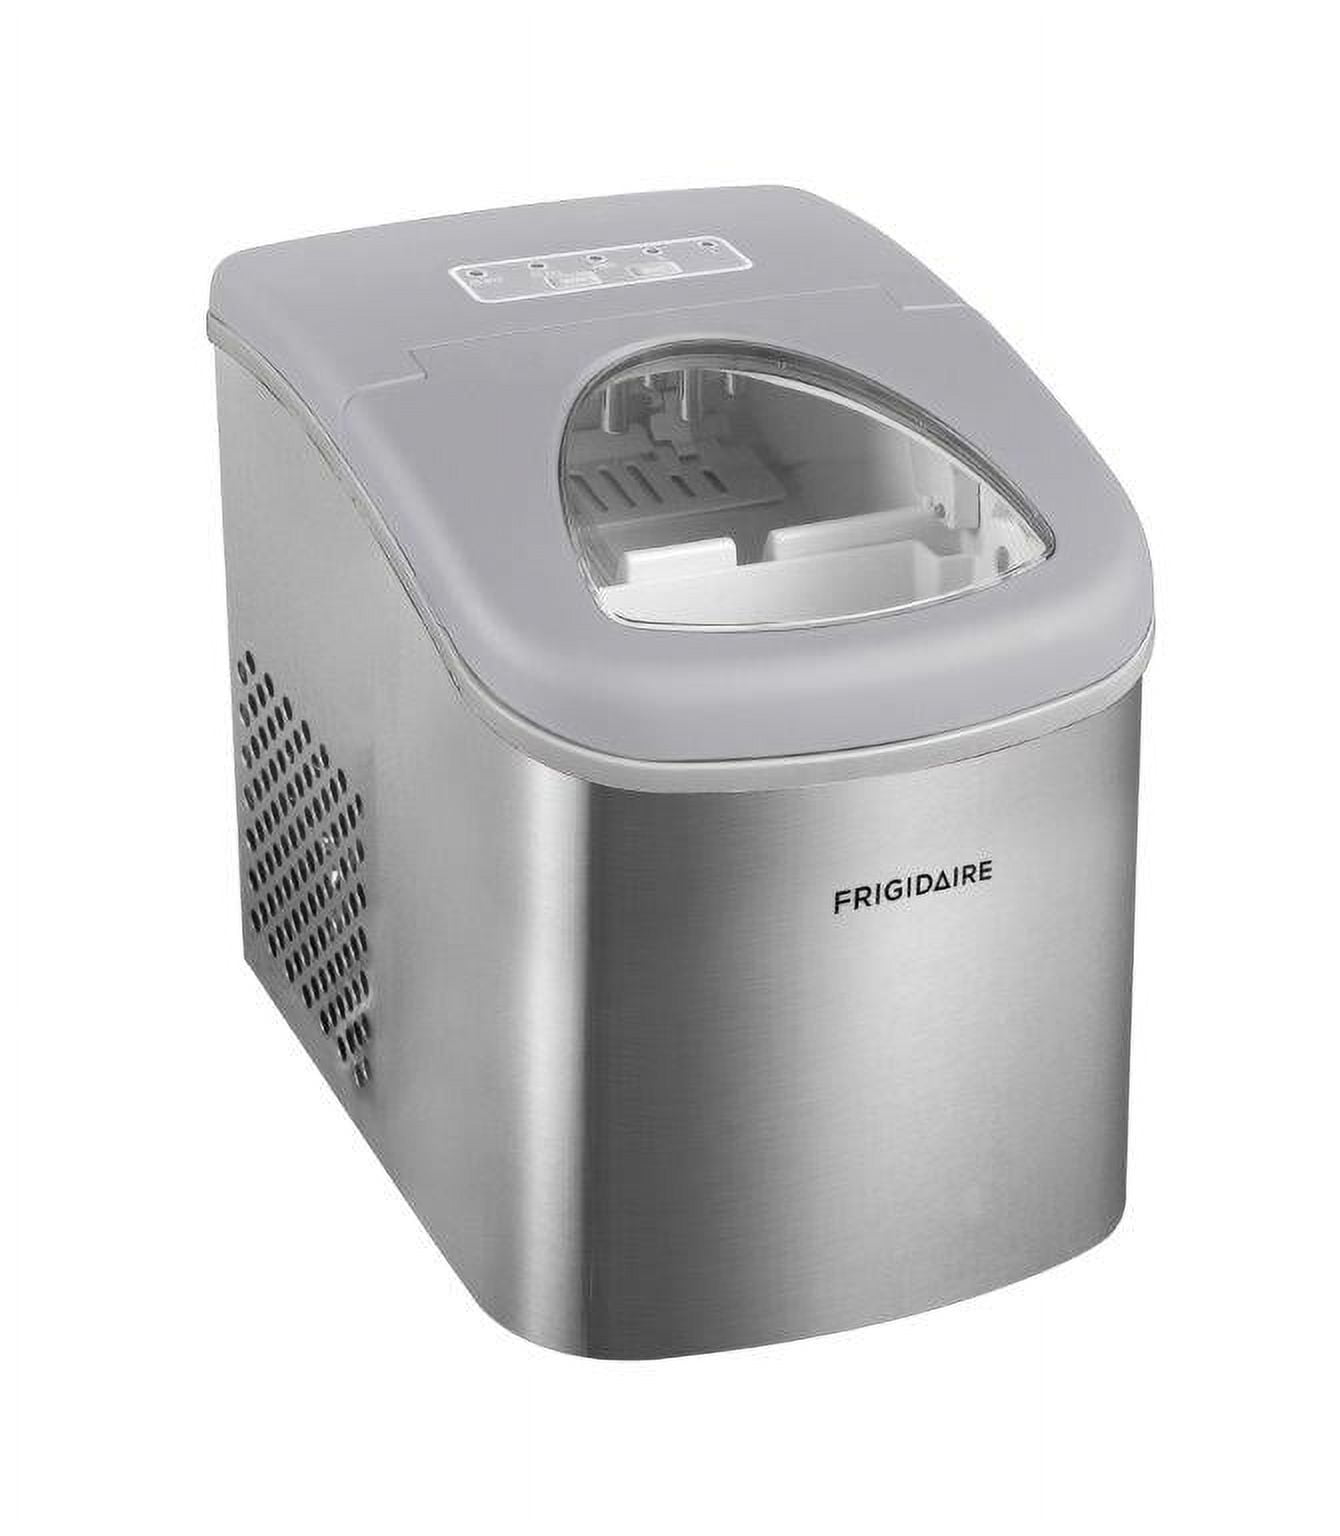 Frigidaire, 26 lbs. Ice Maker, Bullet-Shaped Ice, Stainless Steel